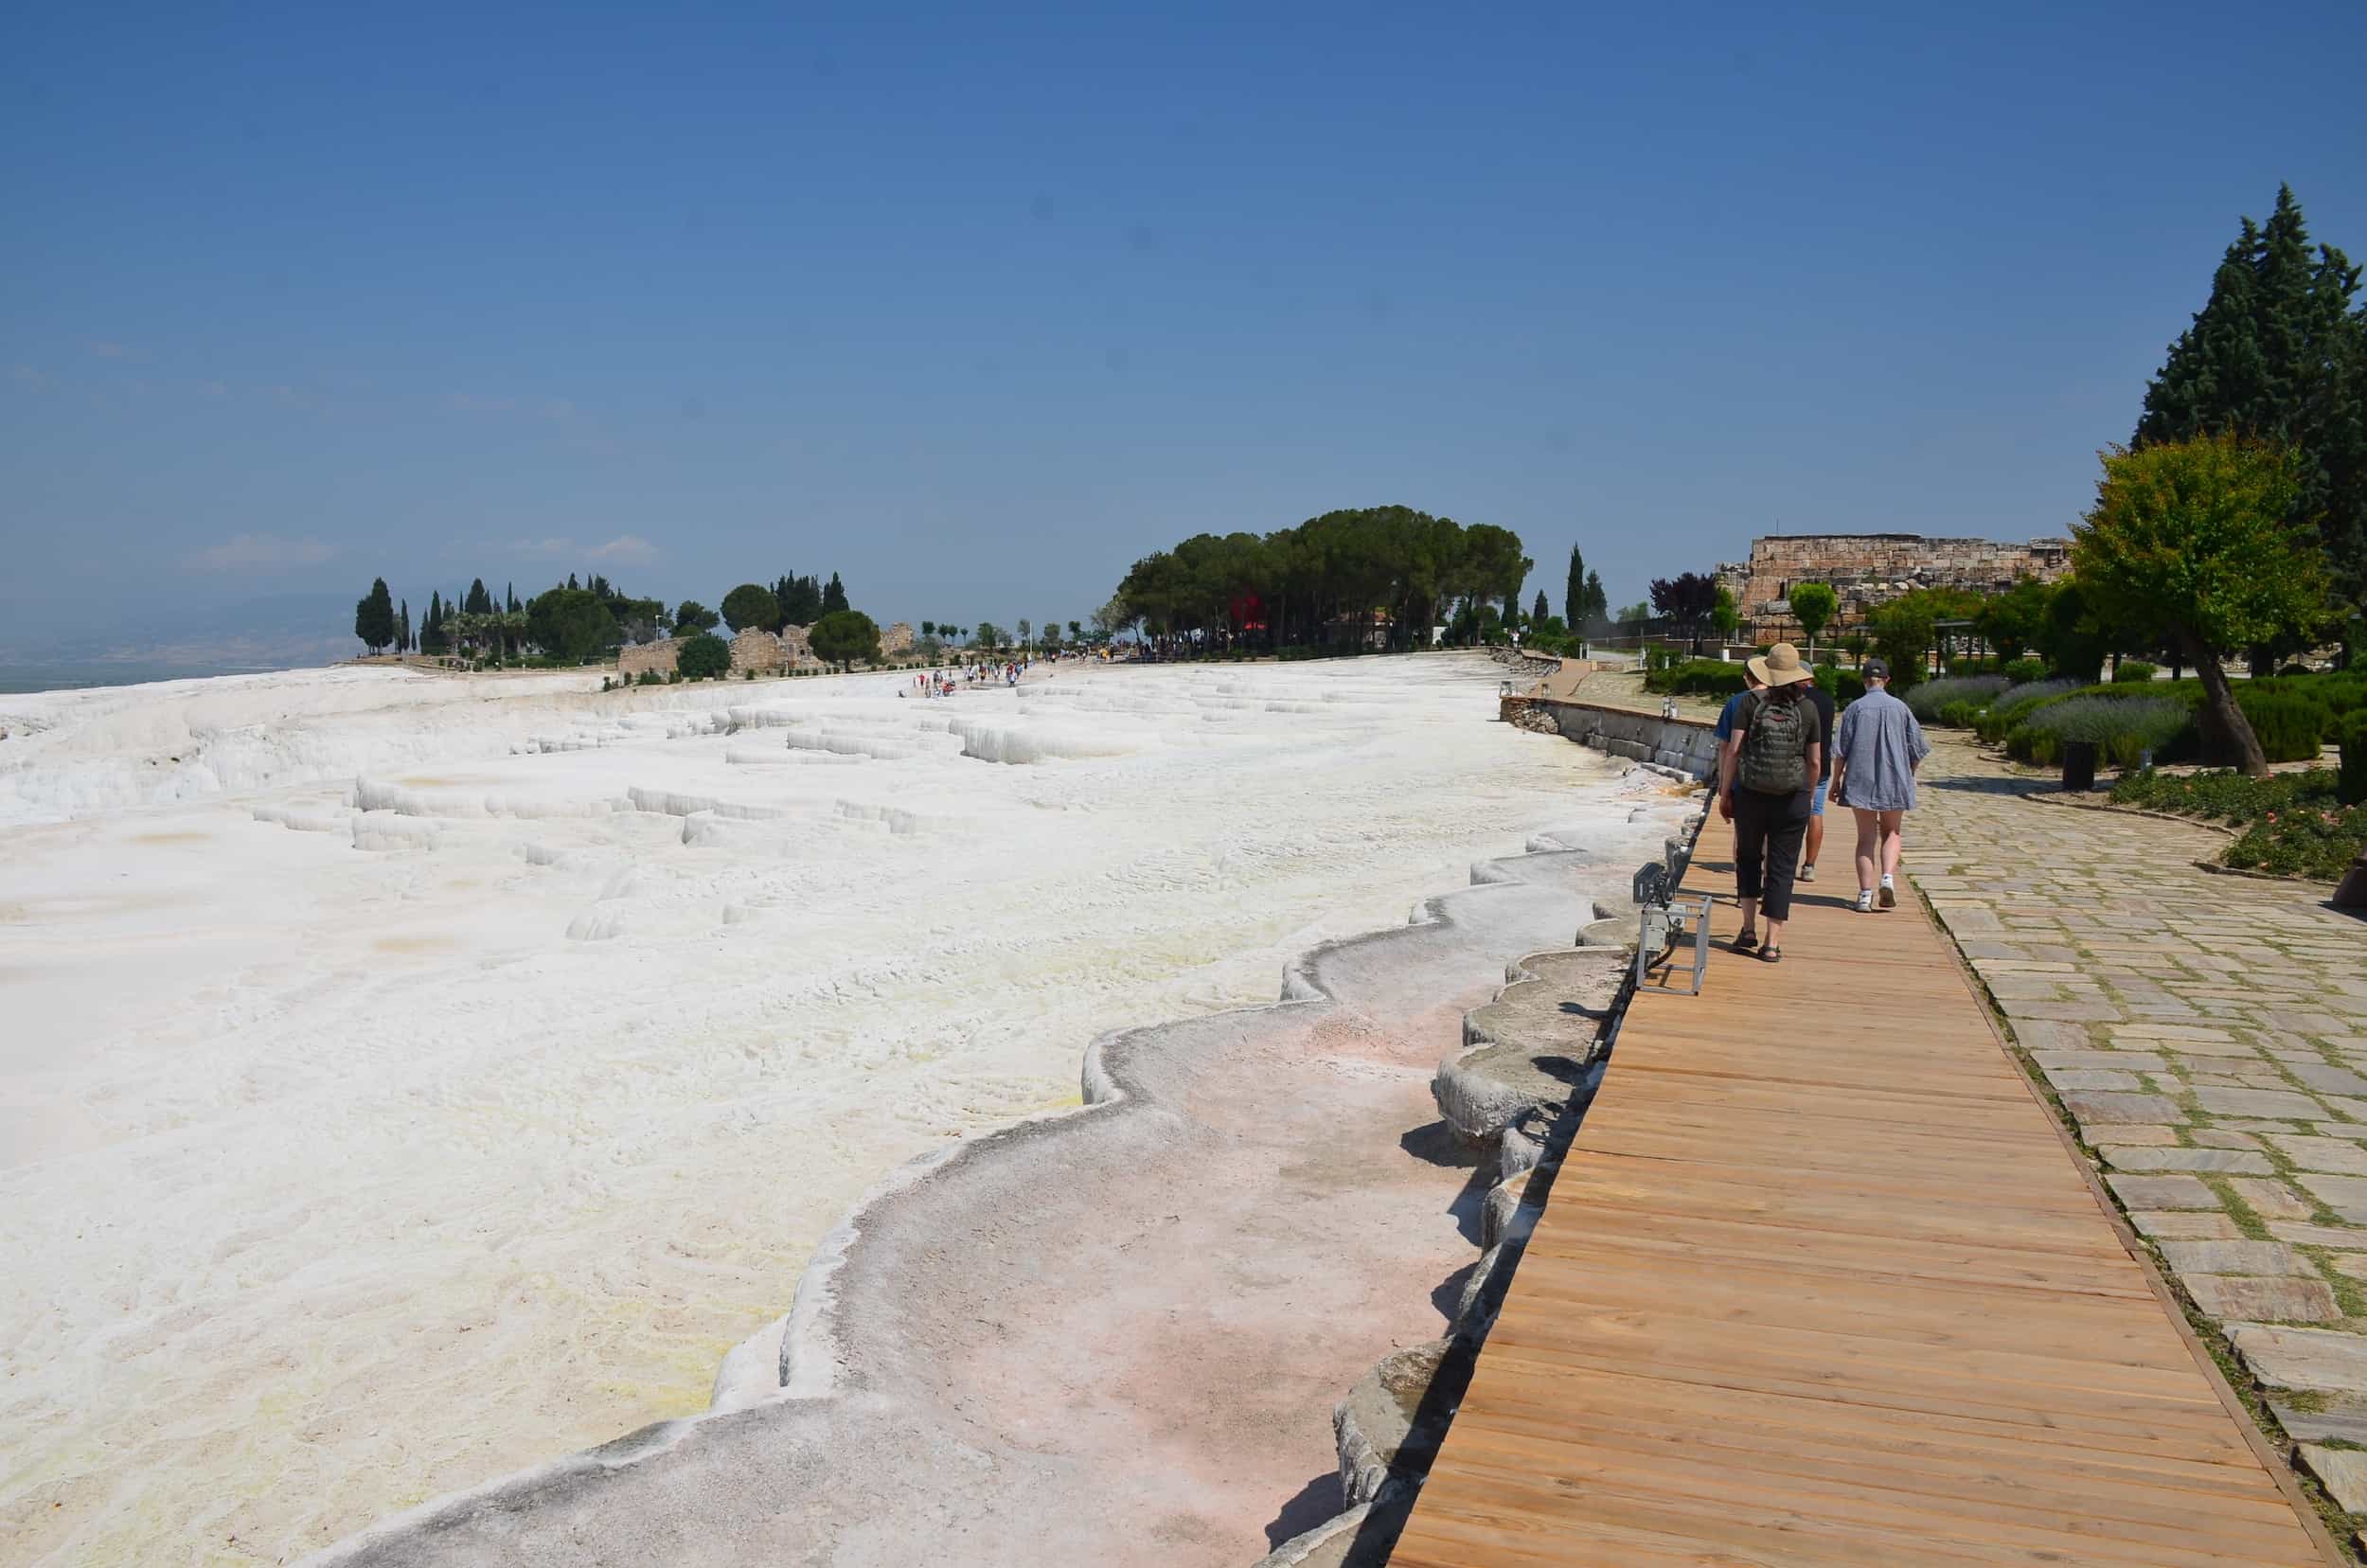 Top of the terraces at Pamukkale